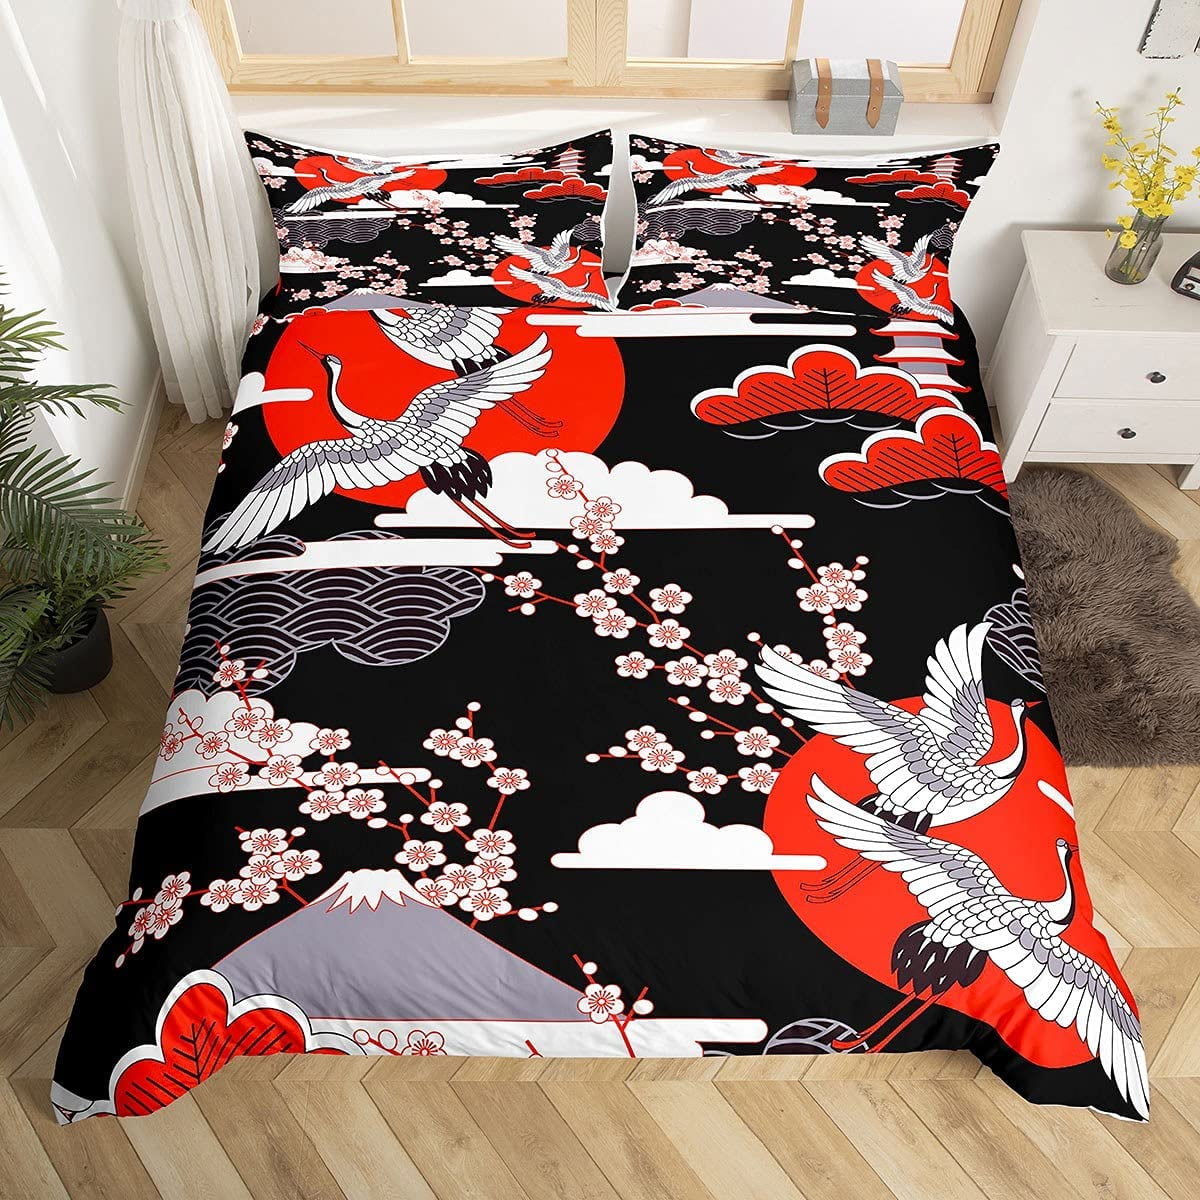 Ski Duvet Cover 3 Pieces Extreme Sports Theme Comforter Cover Set Queen Ski Sports Decor Bedding Set for Adult Teen Kids Boys Snow Mountain Printed Decor Simple Soft Duvet Cover with Zipper Ties